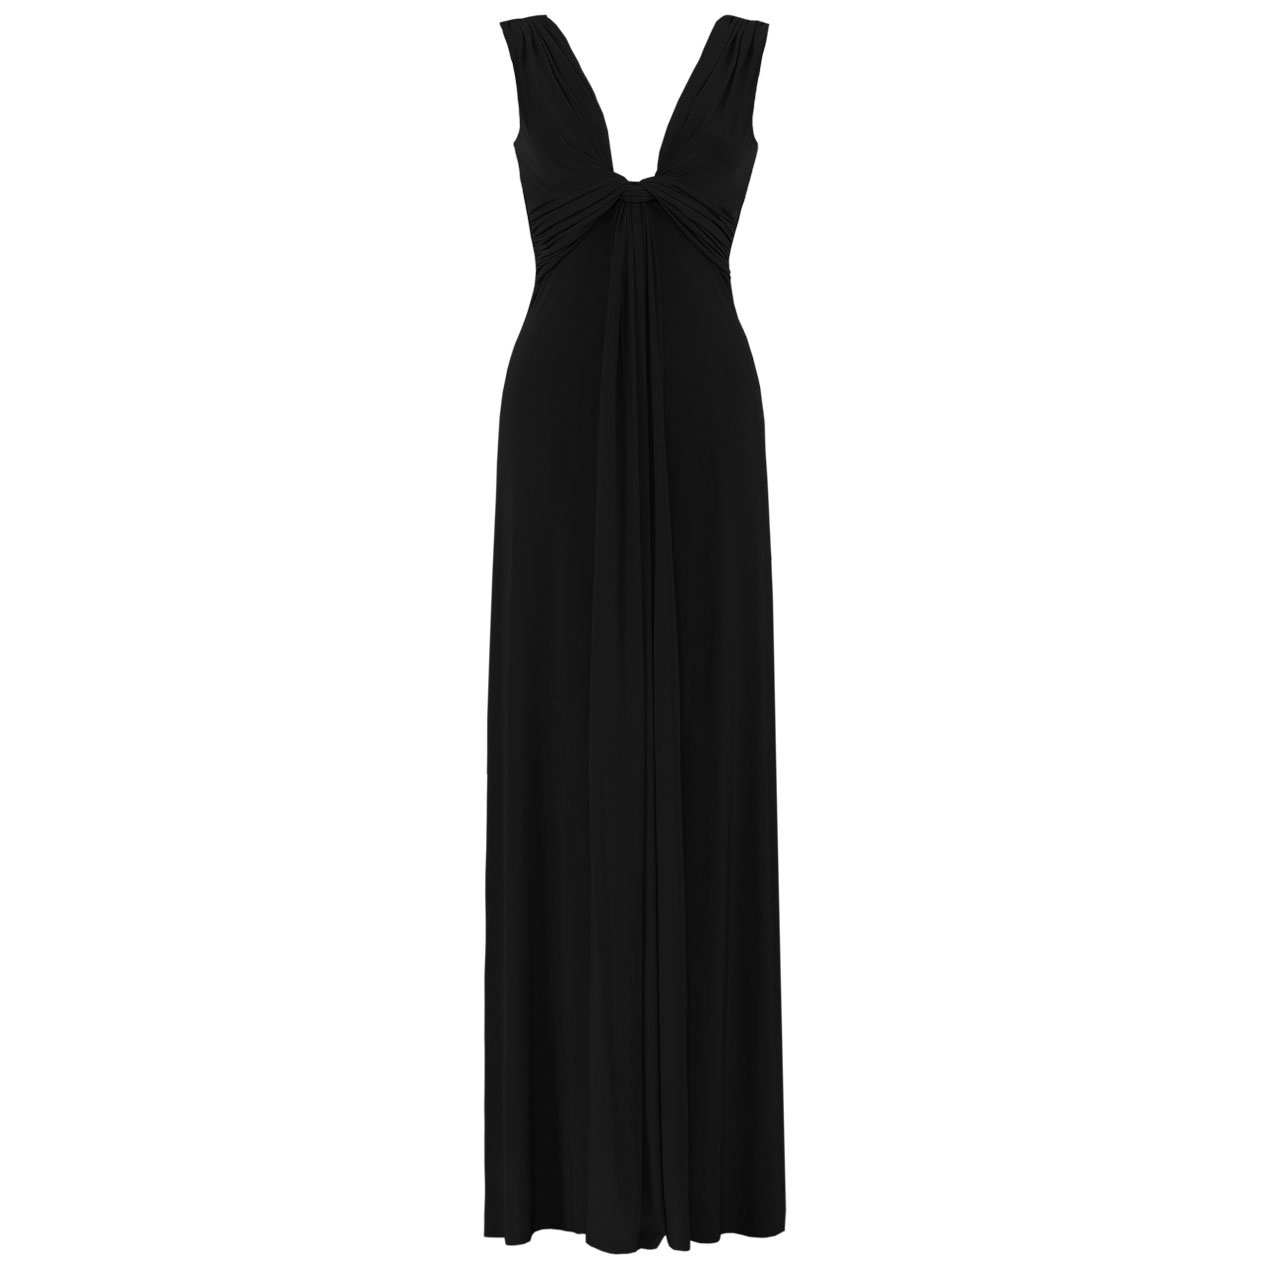 BLACK LONG GRECIAN SUMMER EVENING PROM PARTY MAXI GOWN DRESS UK 8-10 ...